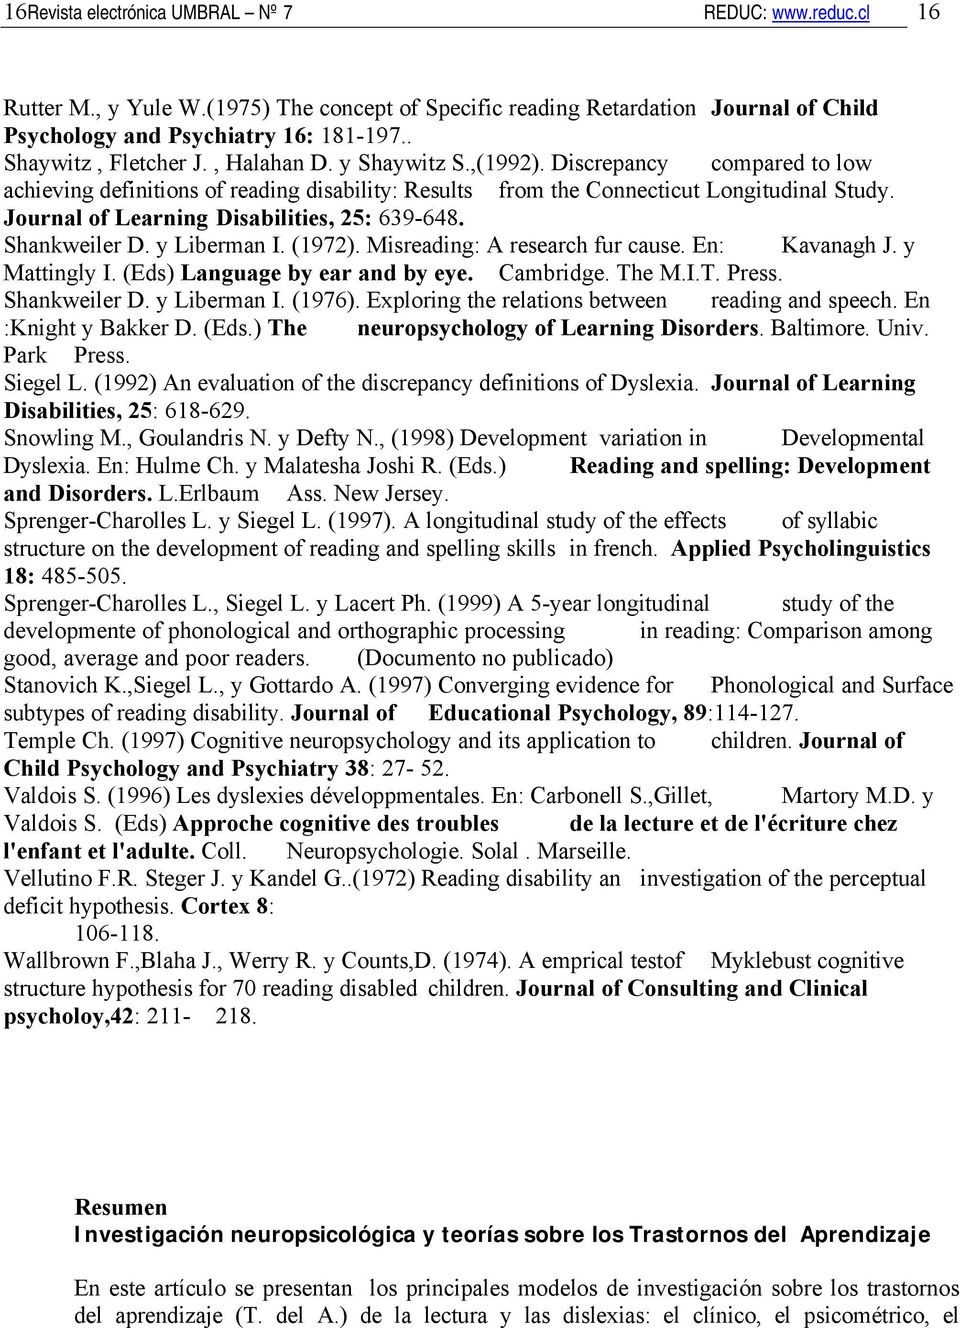 Journal of Learning Disabilities, 25: 639-648. Shankweiler D. y Liberman I. (1972). Misreading: A research fur cause. En: Kavanagh J. y Mattingly I. (Eds) Language by ear and by eye. Cambridge. The M.